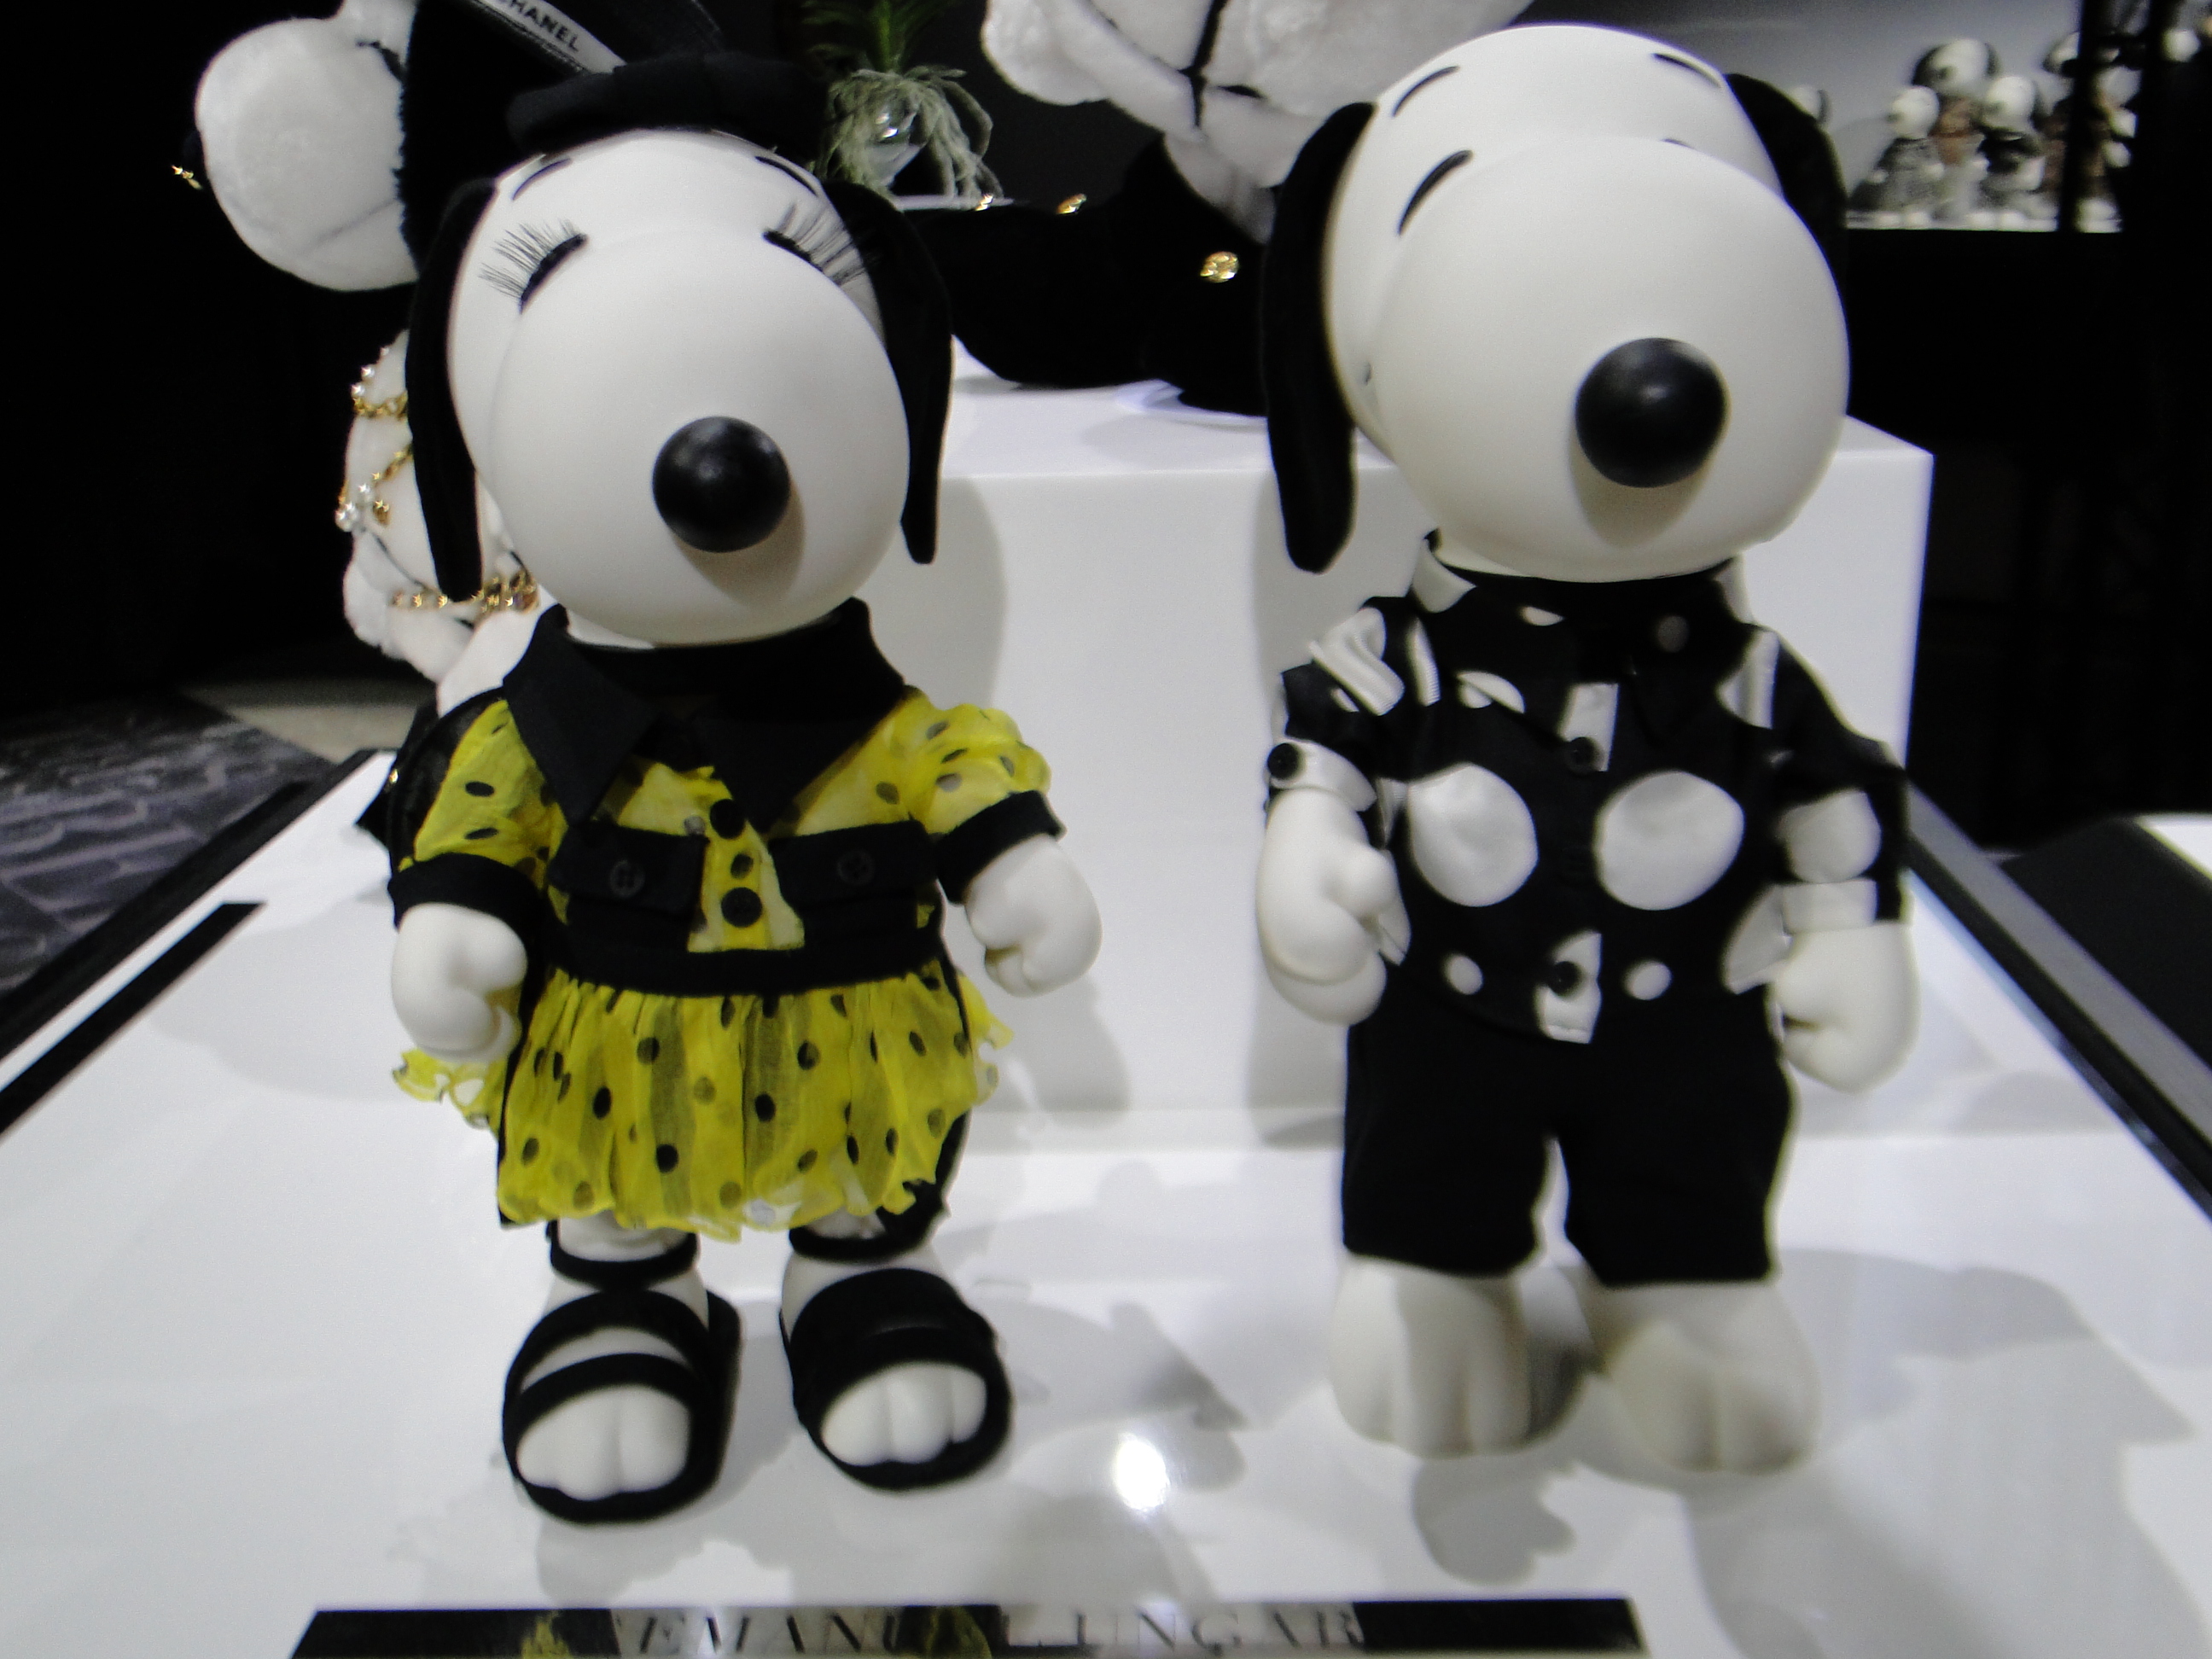 SNOOPY AND BELE IN FASHION Paris France Exhibition Exposition - Palais de Tokyo - copyright Go with the Blog DSC06439